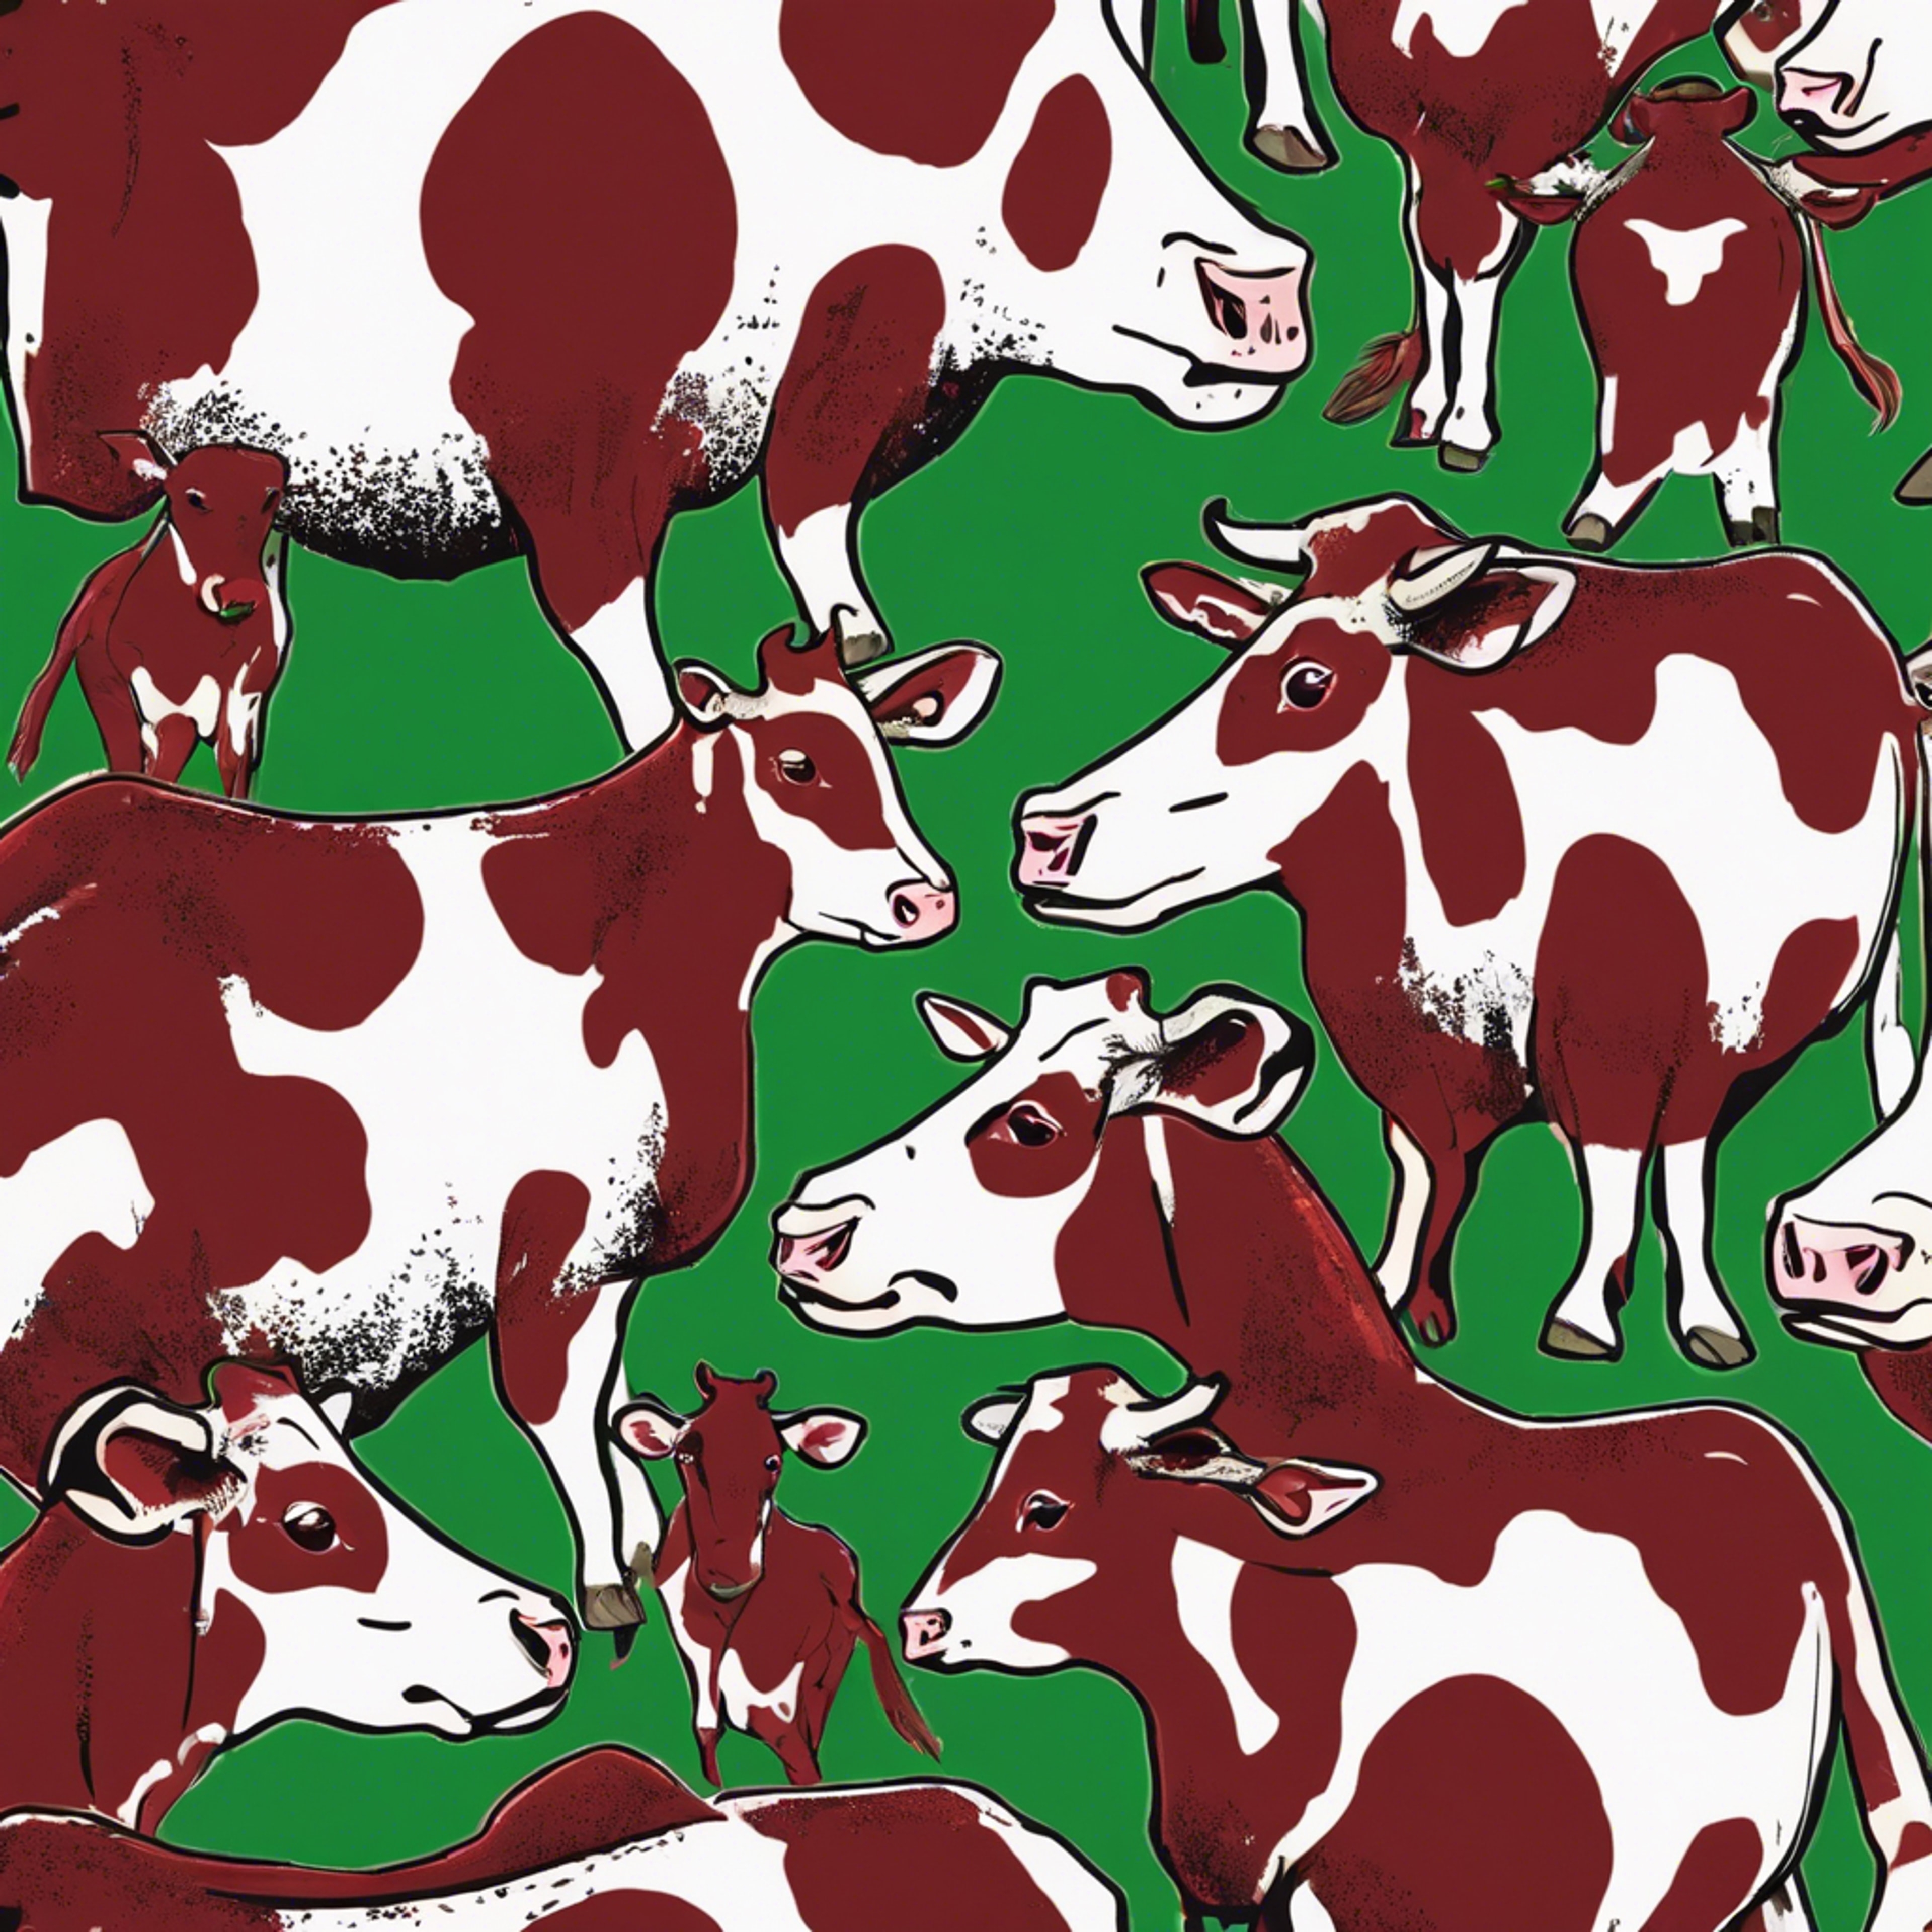 Cow spots in a mixed arrangement of rich red and fresh green. ورق الجدران[f1cd1f055c9d420f9ac5]